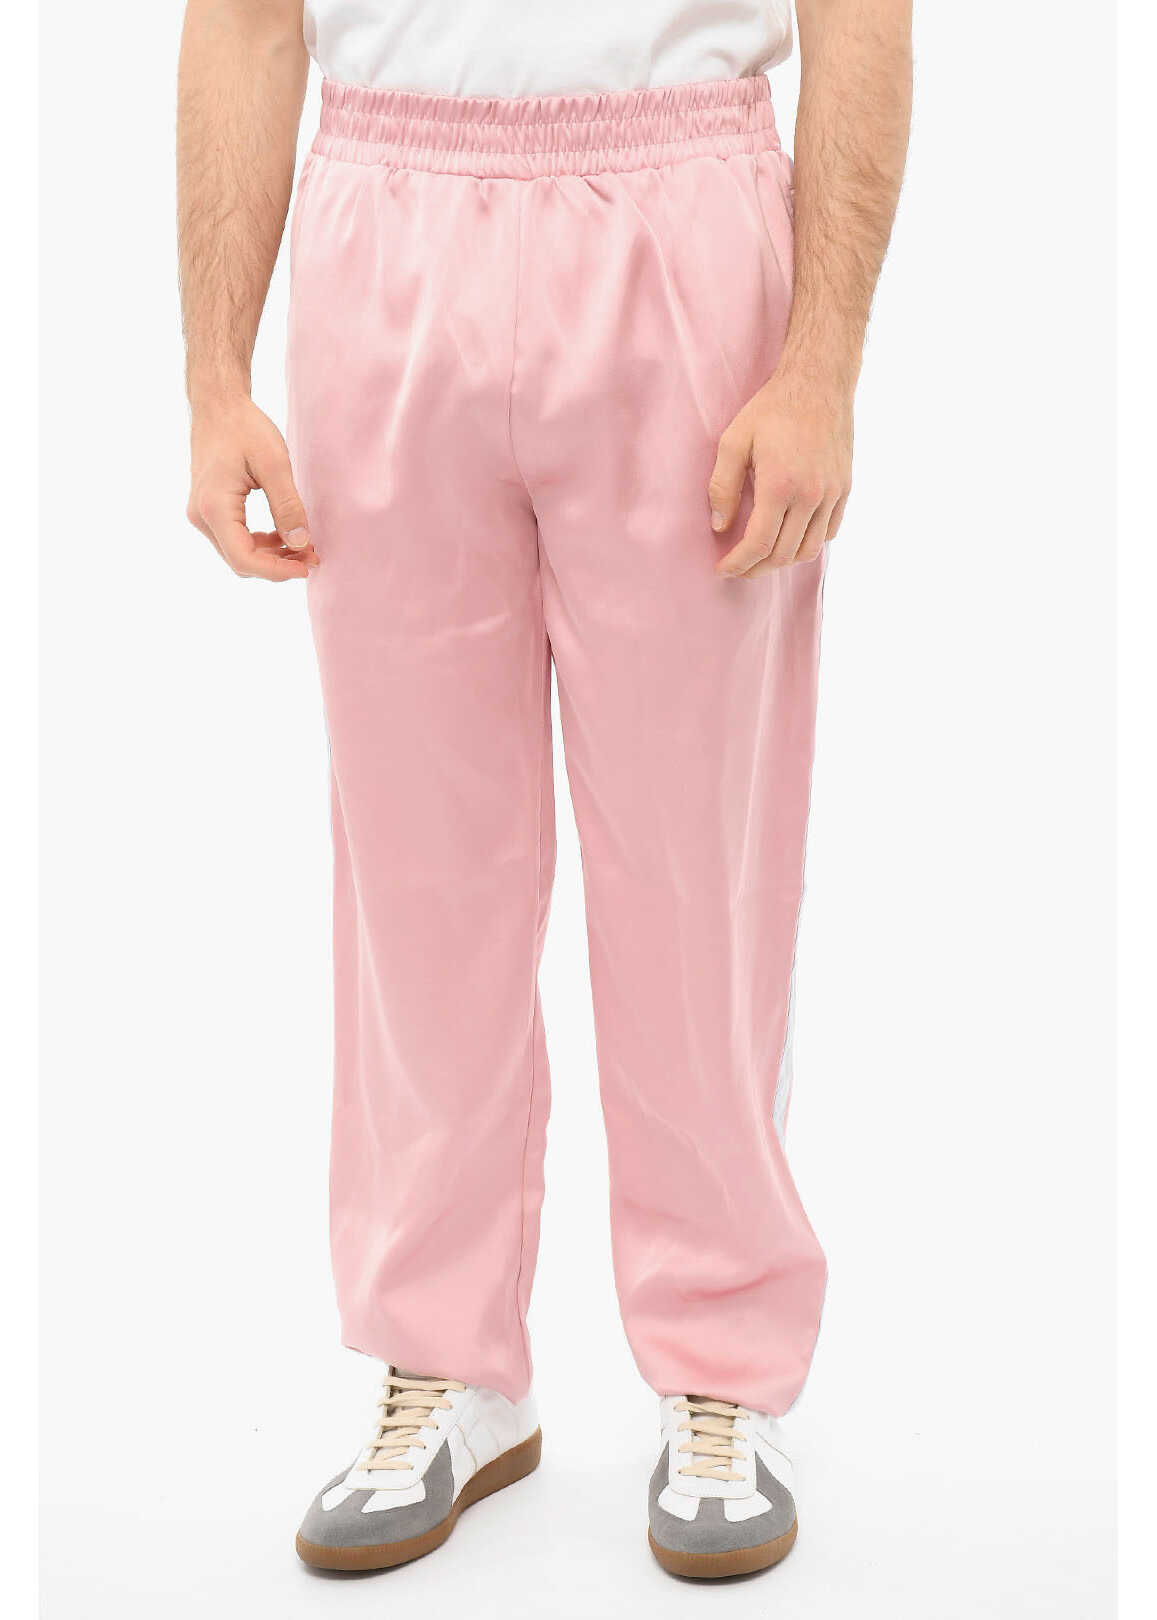 Bel-Air Athletics Jersey Academy Joggers With Side Bands Pink